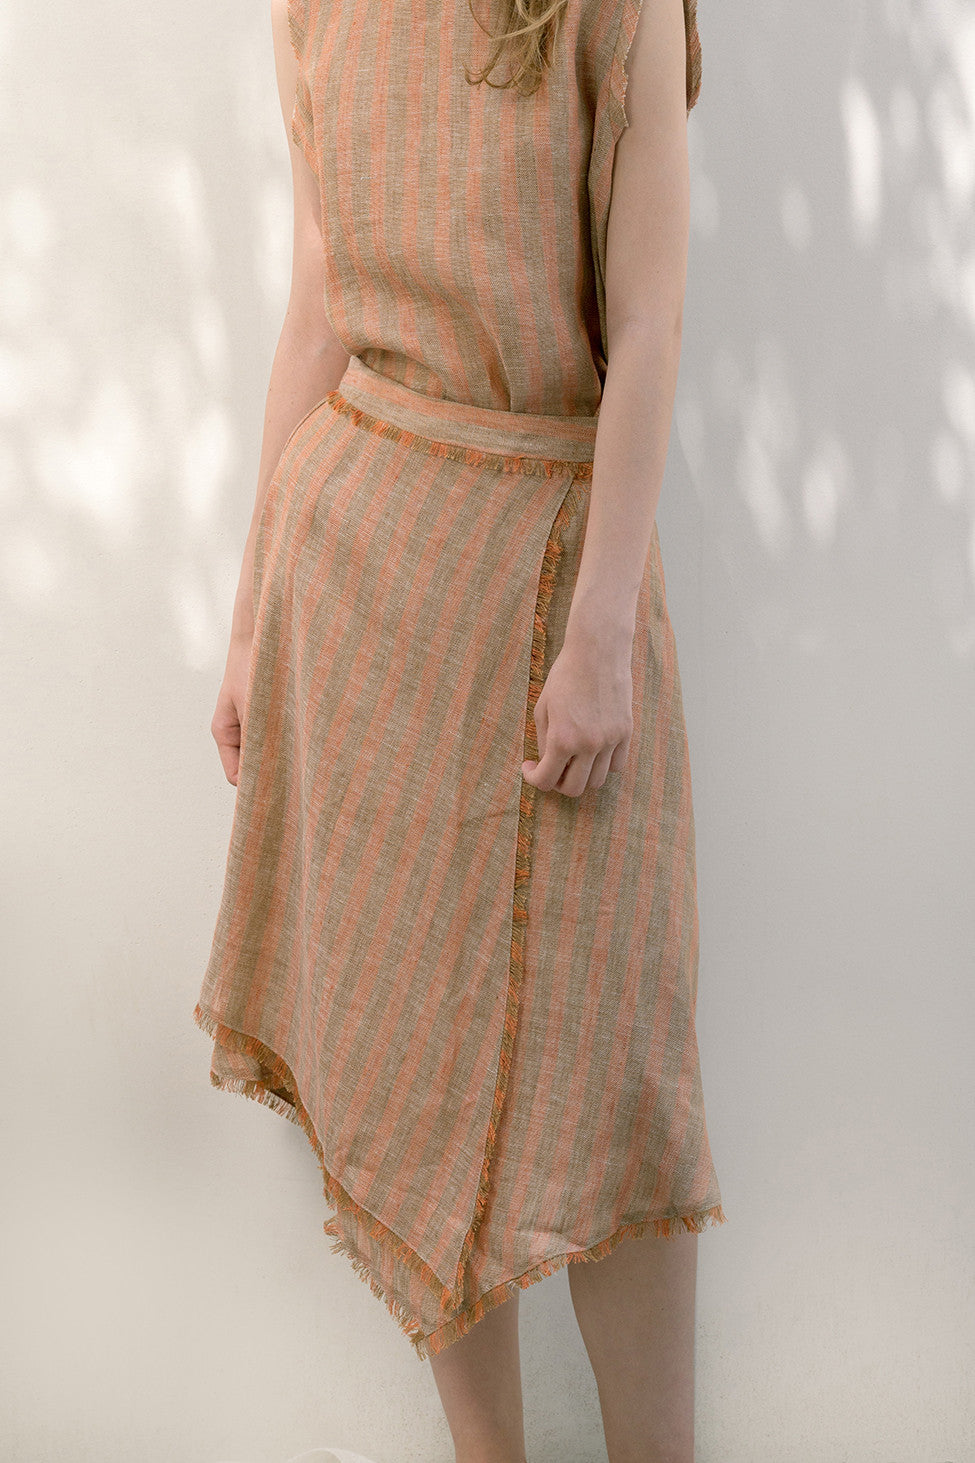 The Majira Skirt in Orange featuring asymmetric wrap design in fluted raw edge with tassel detailing. Concealed side zip closure. High waist in below-the-knee length. Partial lined.